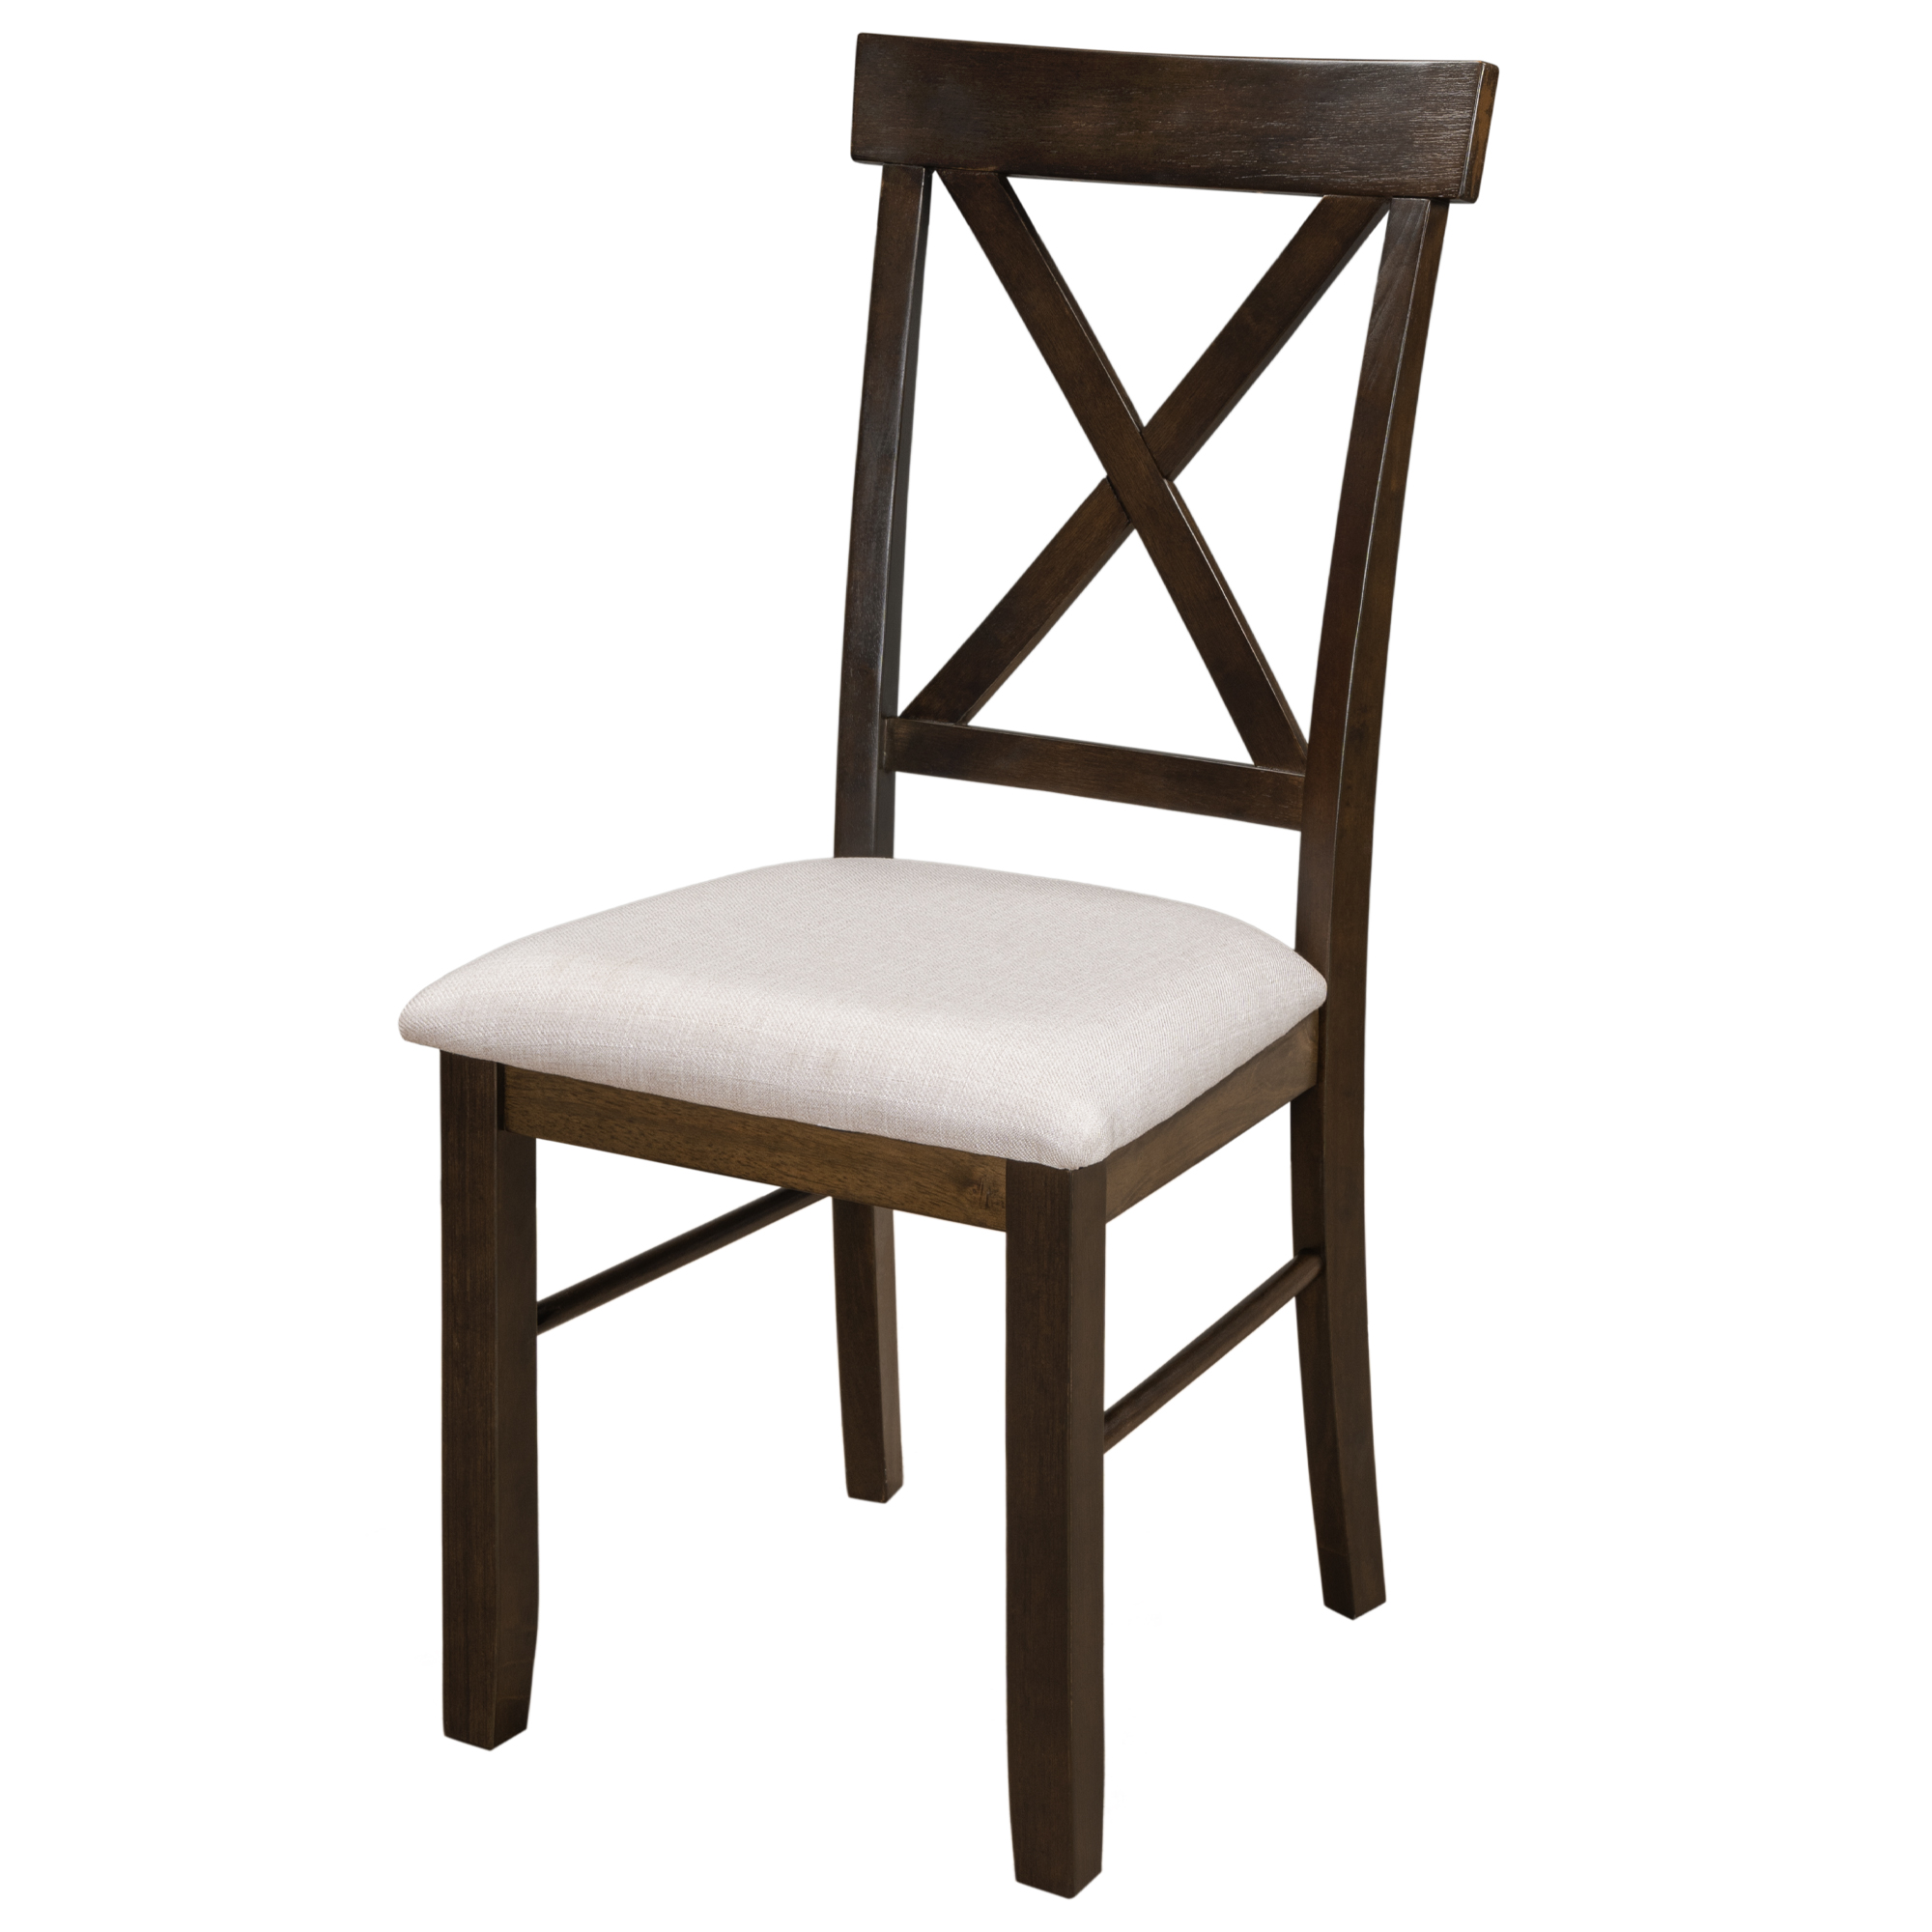 2 Pieces Farmhouse Rustic Wood Kitchen Upholstered X-Back Dining Chairs, Brown+Beige-Boyel Living